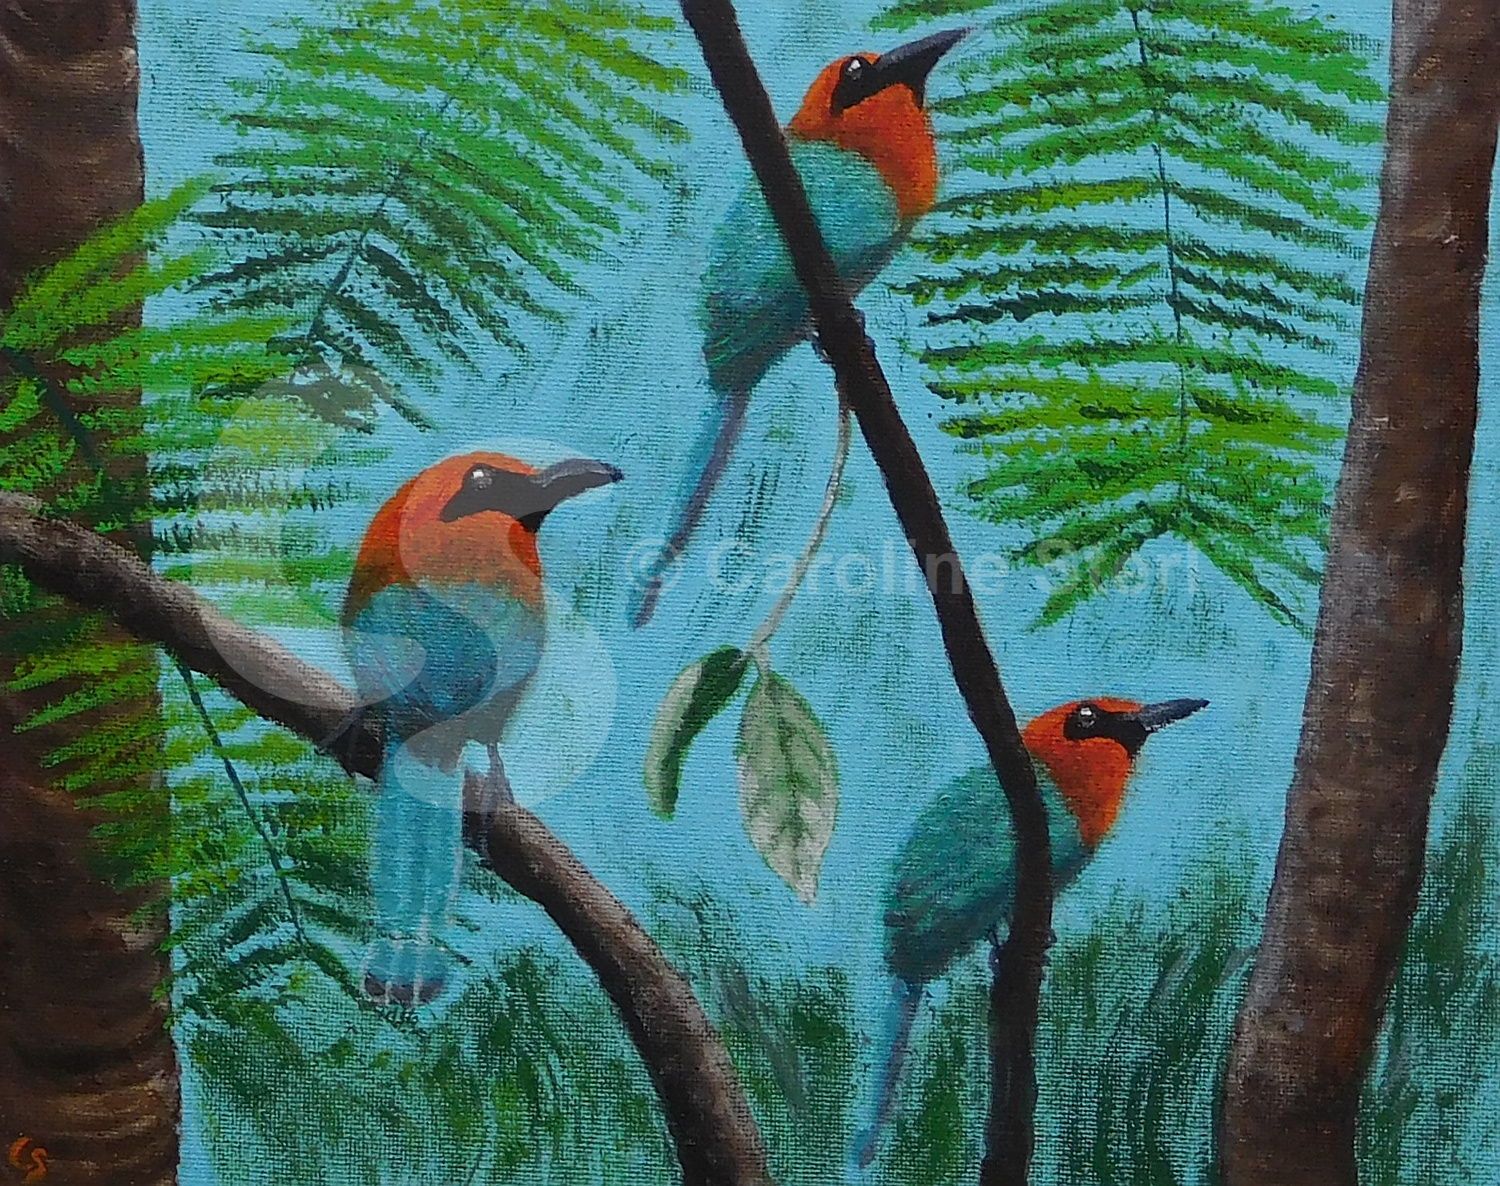 Painting: Broad-billed Motmots